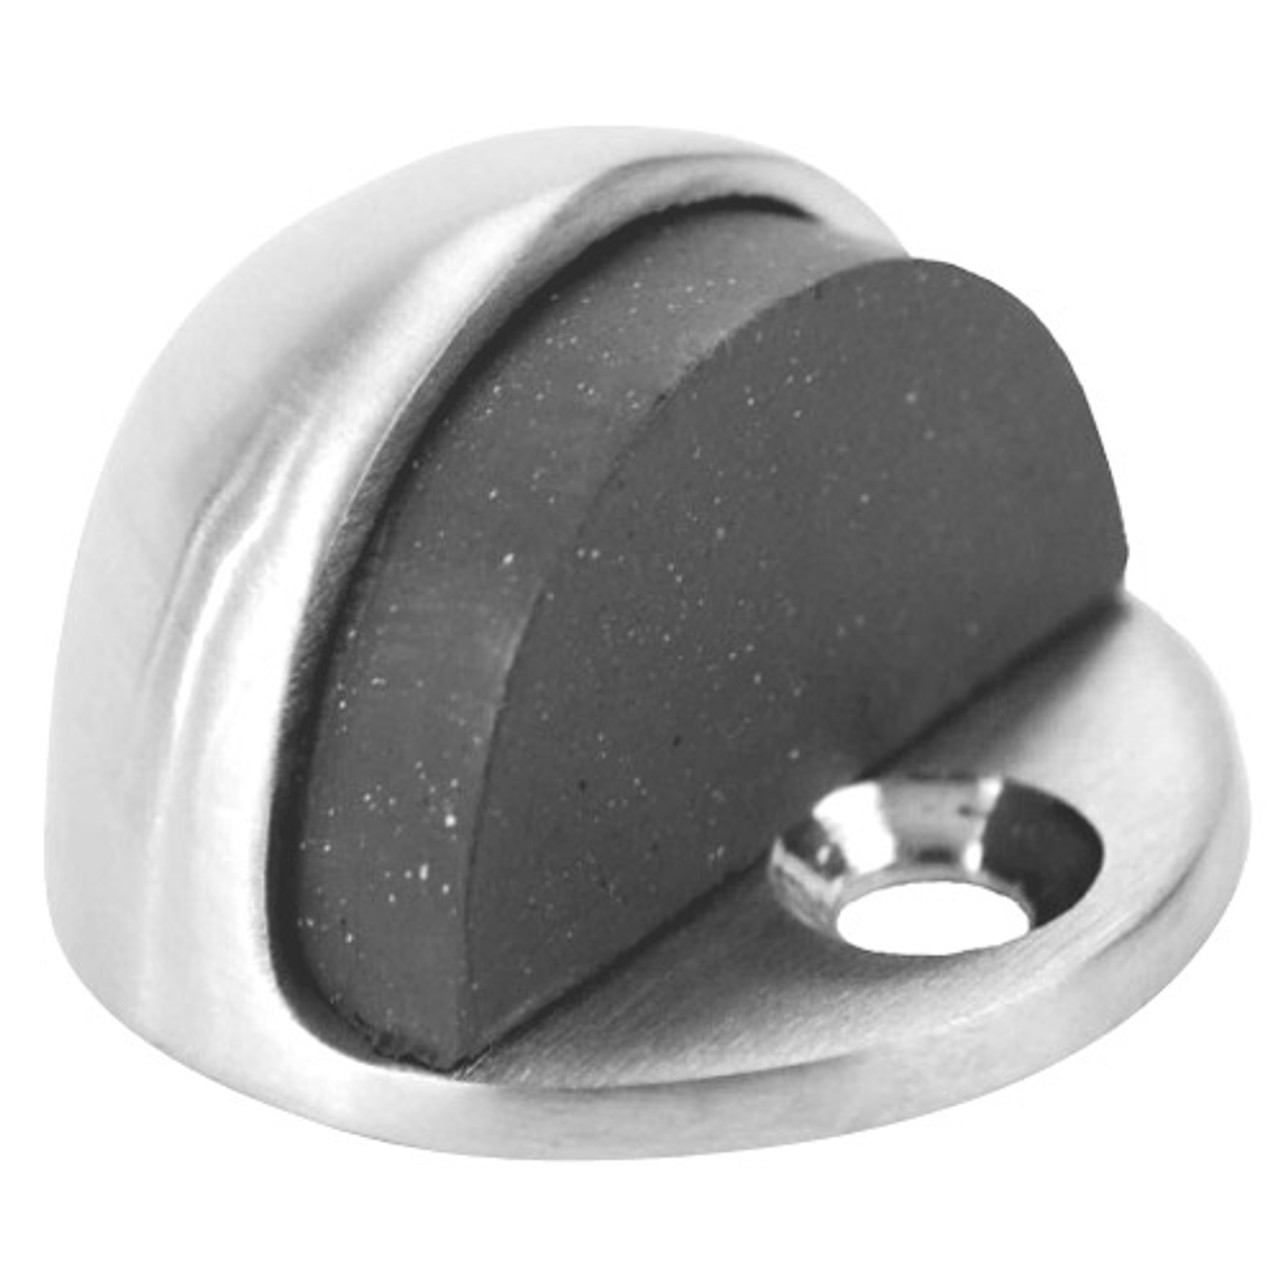 1440-625 Don Jo Floor Stop in Polished Chrome Finish